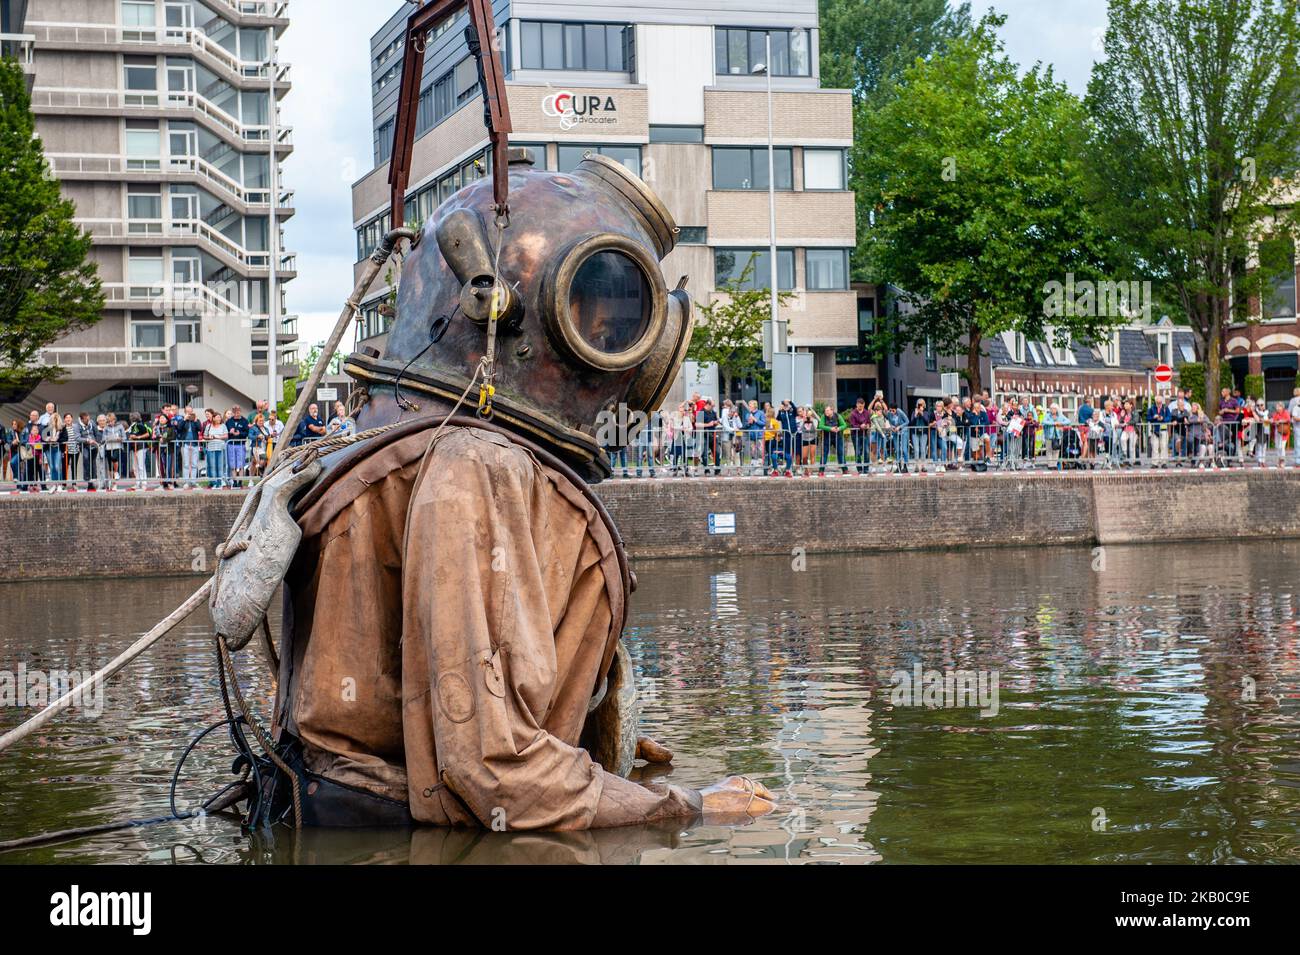 An animated marionette of French street theatre company Royal de Luxe parades through the streets in the European Capital of Culture 2018, Leeuwarden, The Netherlands, on August 17, 2018. Royal de Luxe present a new story based on the saga of the Giants called 'Grand patin dans la glace' (Big skate on the ice) during three days until August 19, 2018. (Photo by Romy Arroyo Fernandez/NurPhoto) Stock Photo